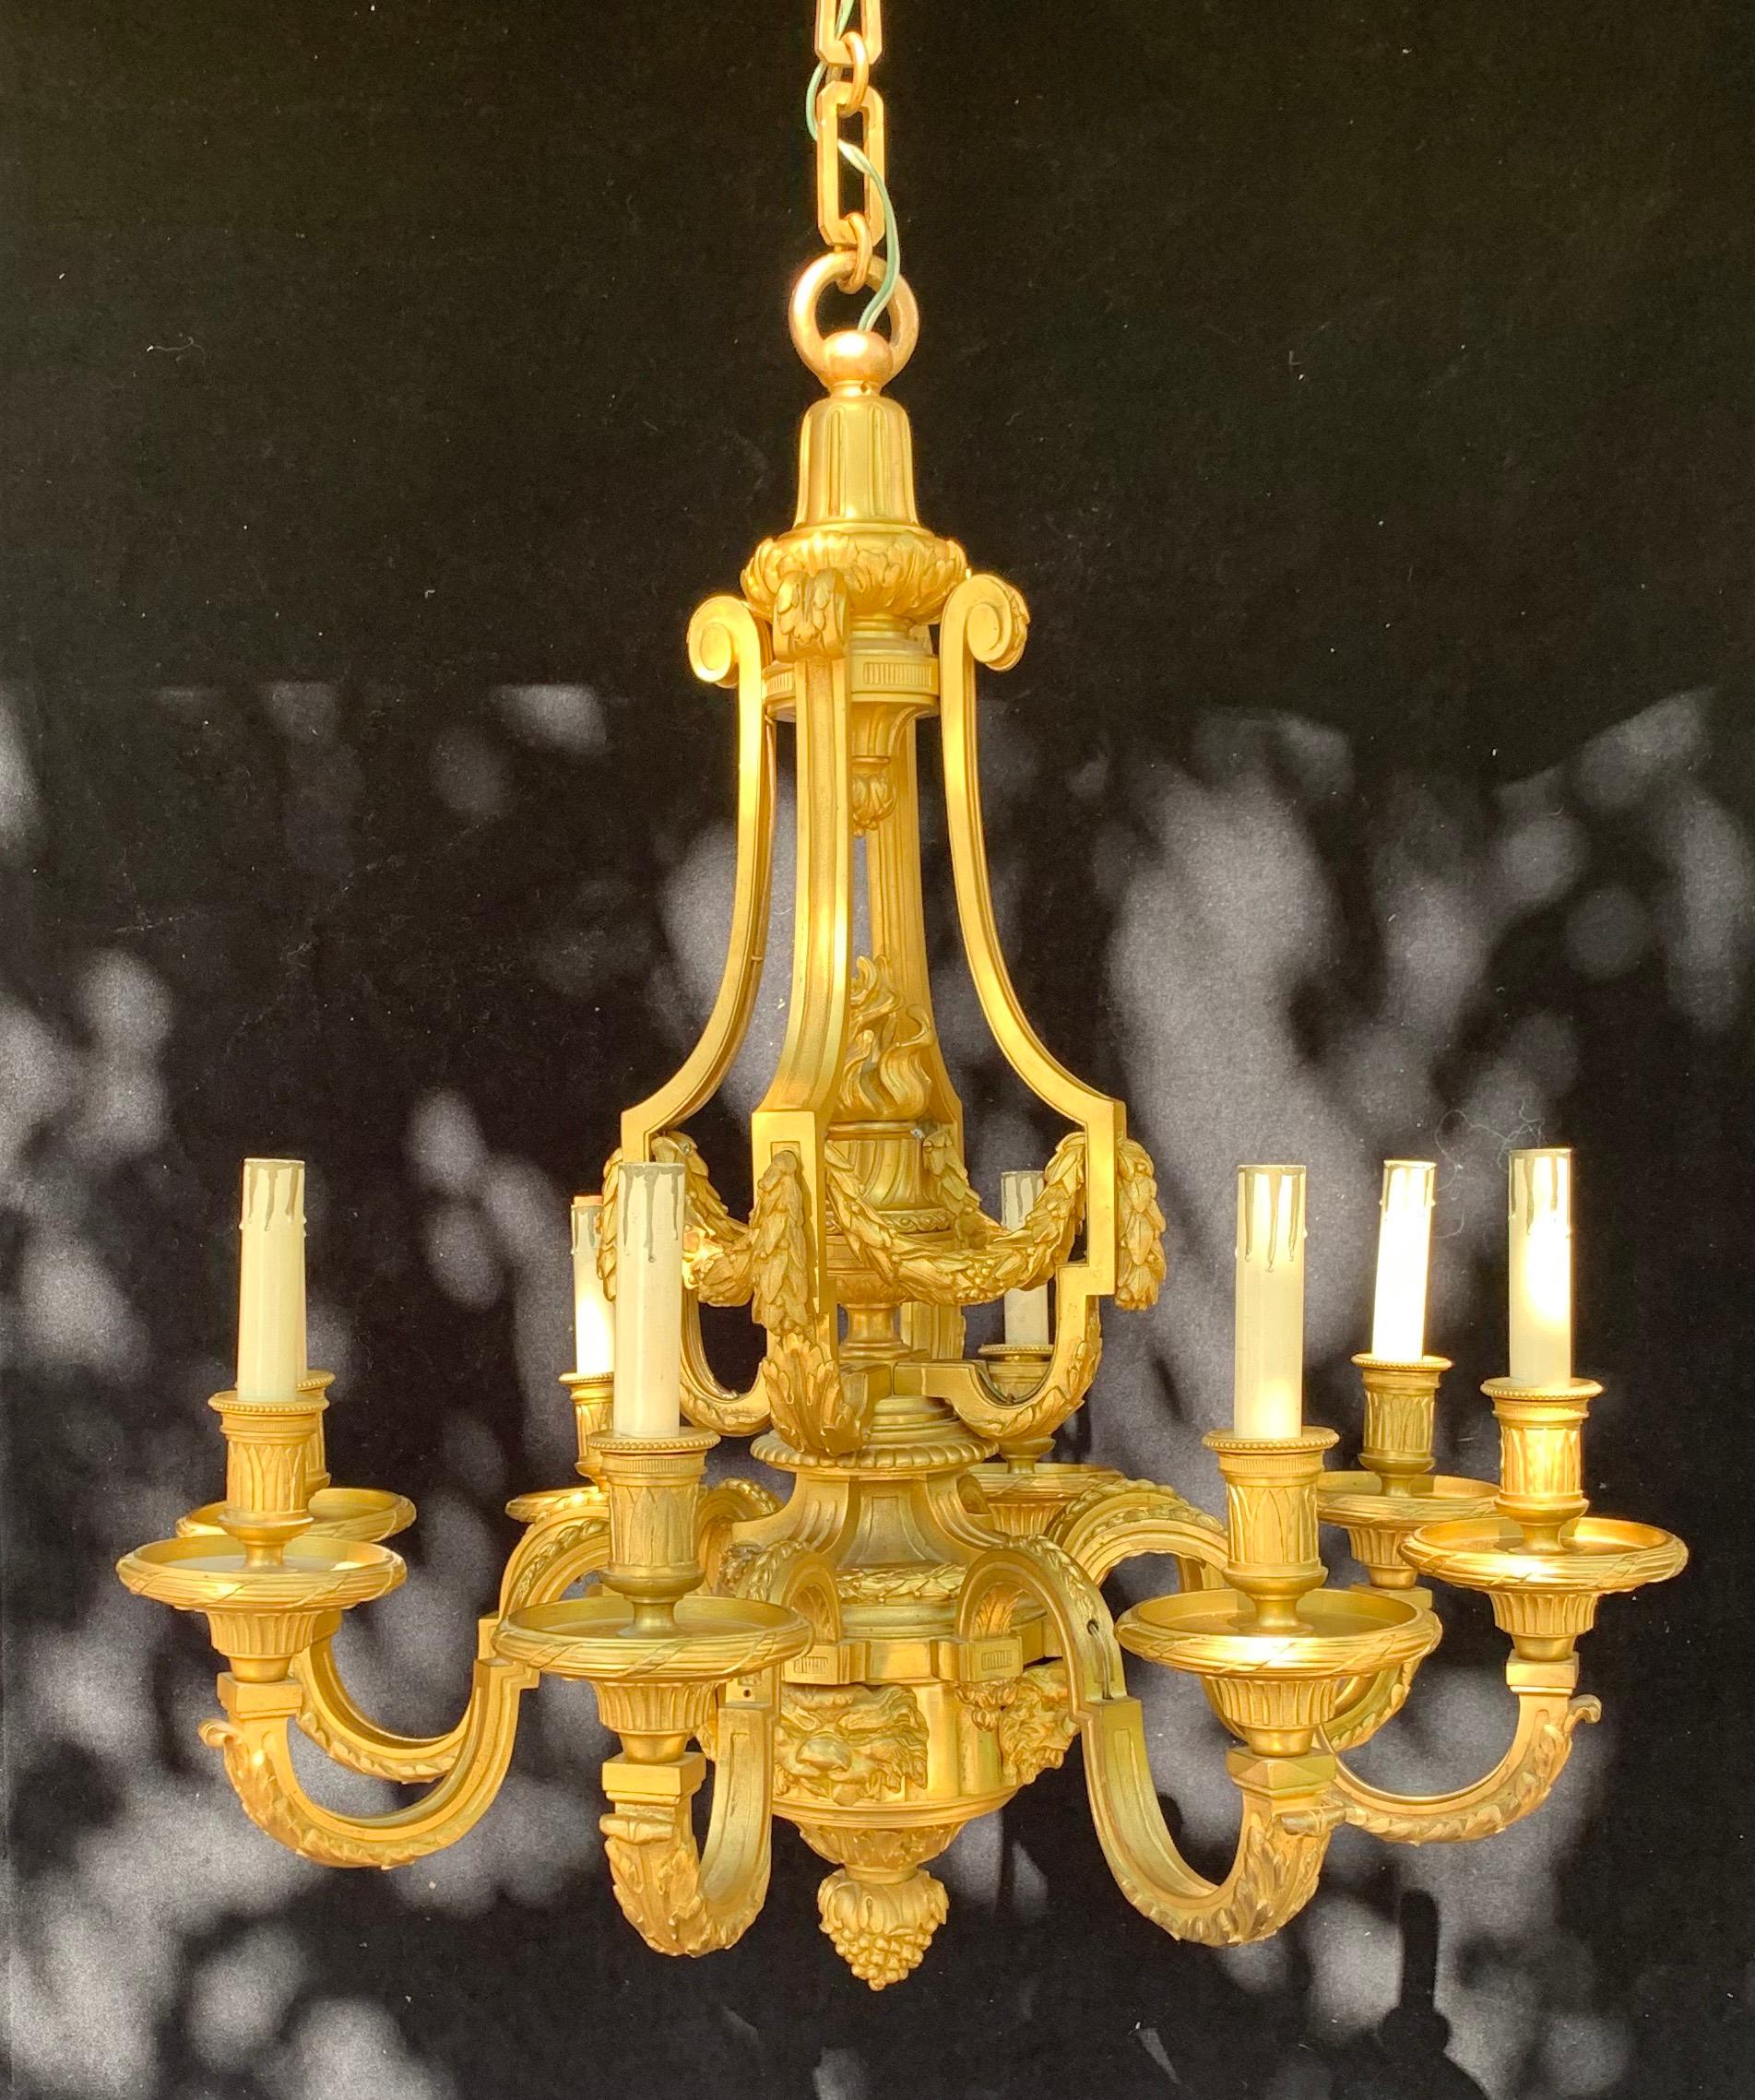 An incredible French doré bronze neoclassical lion mask and urn chandelier with filigree tassels in the manner of Henri Vian with 8 candelabra sockets ready to install and enjoy.
We have the larger version of this exact chandelier in our gallery,